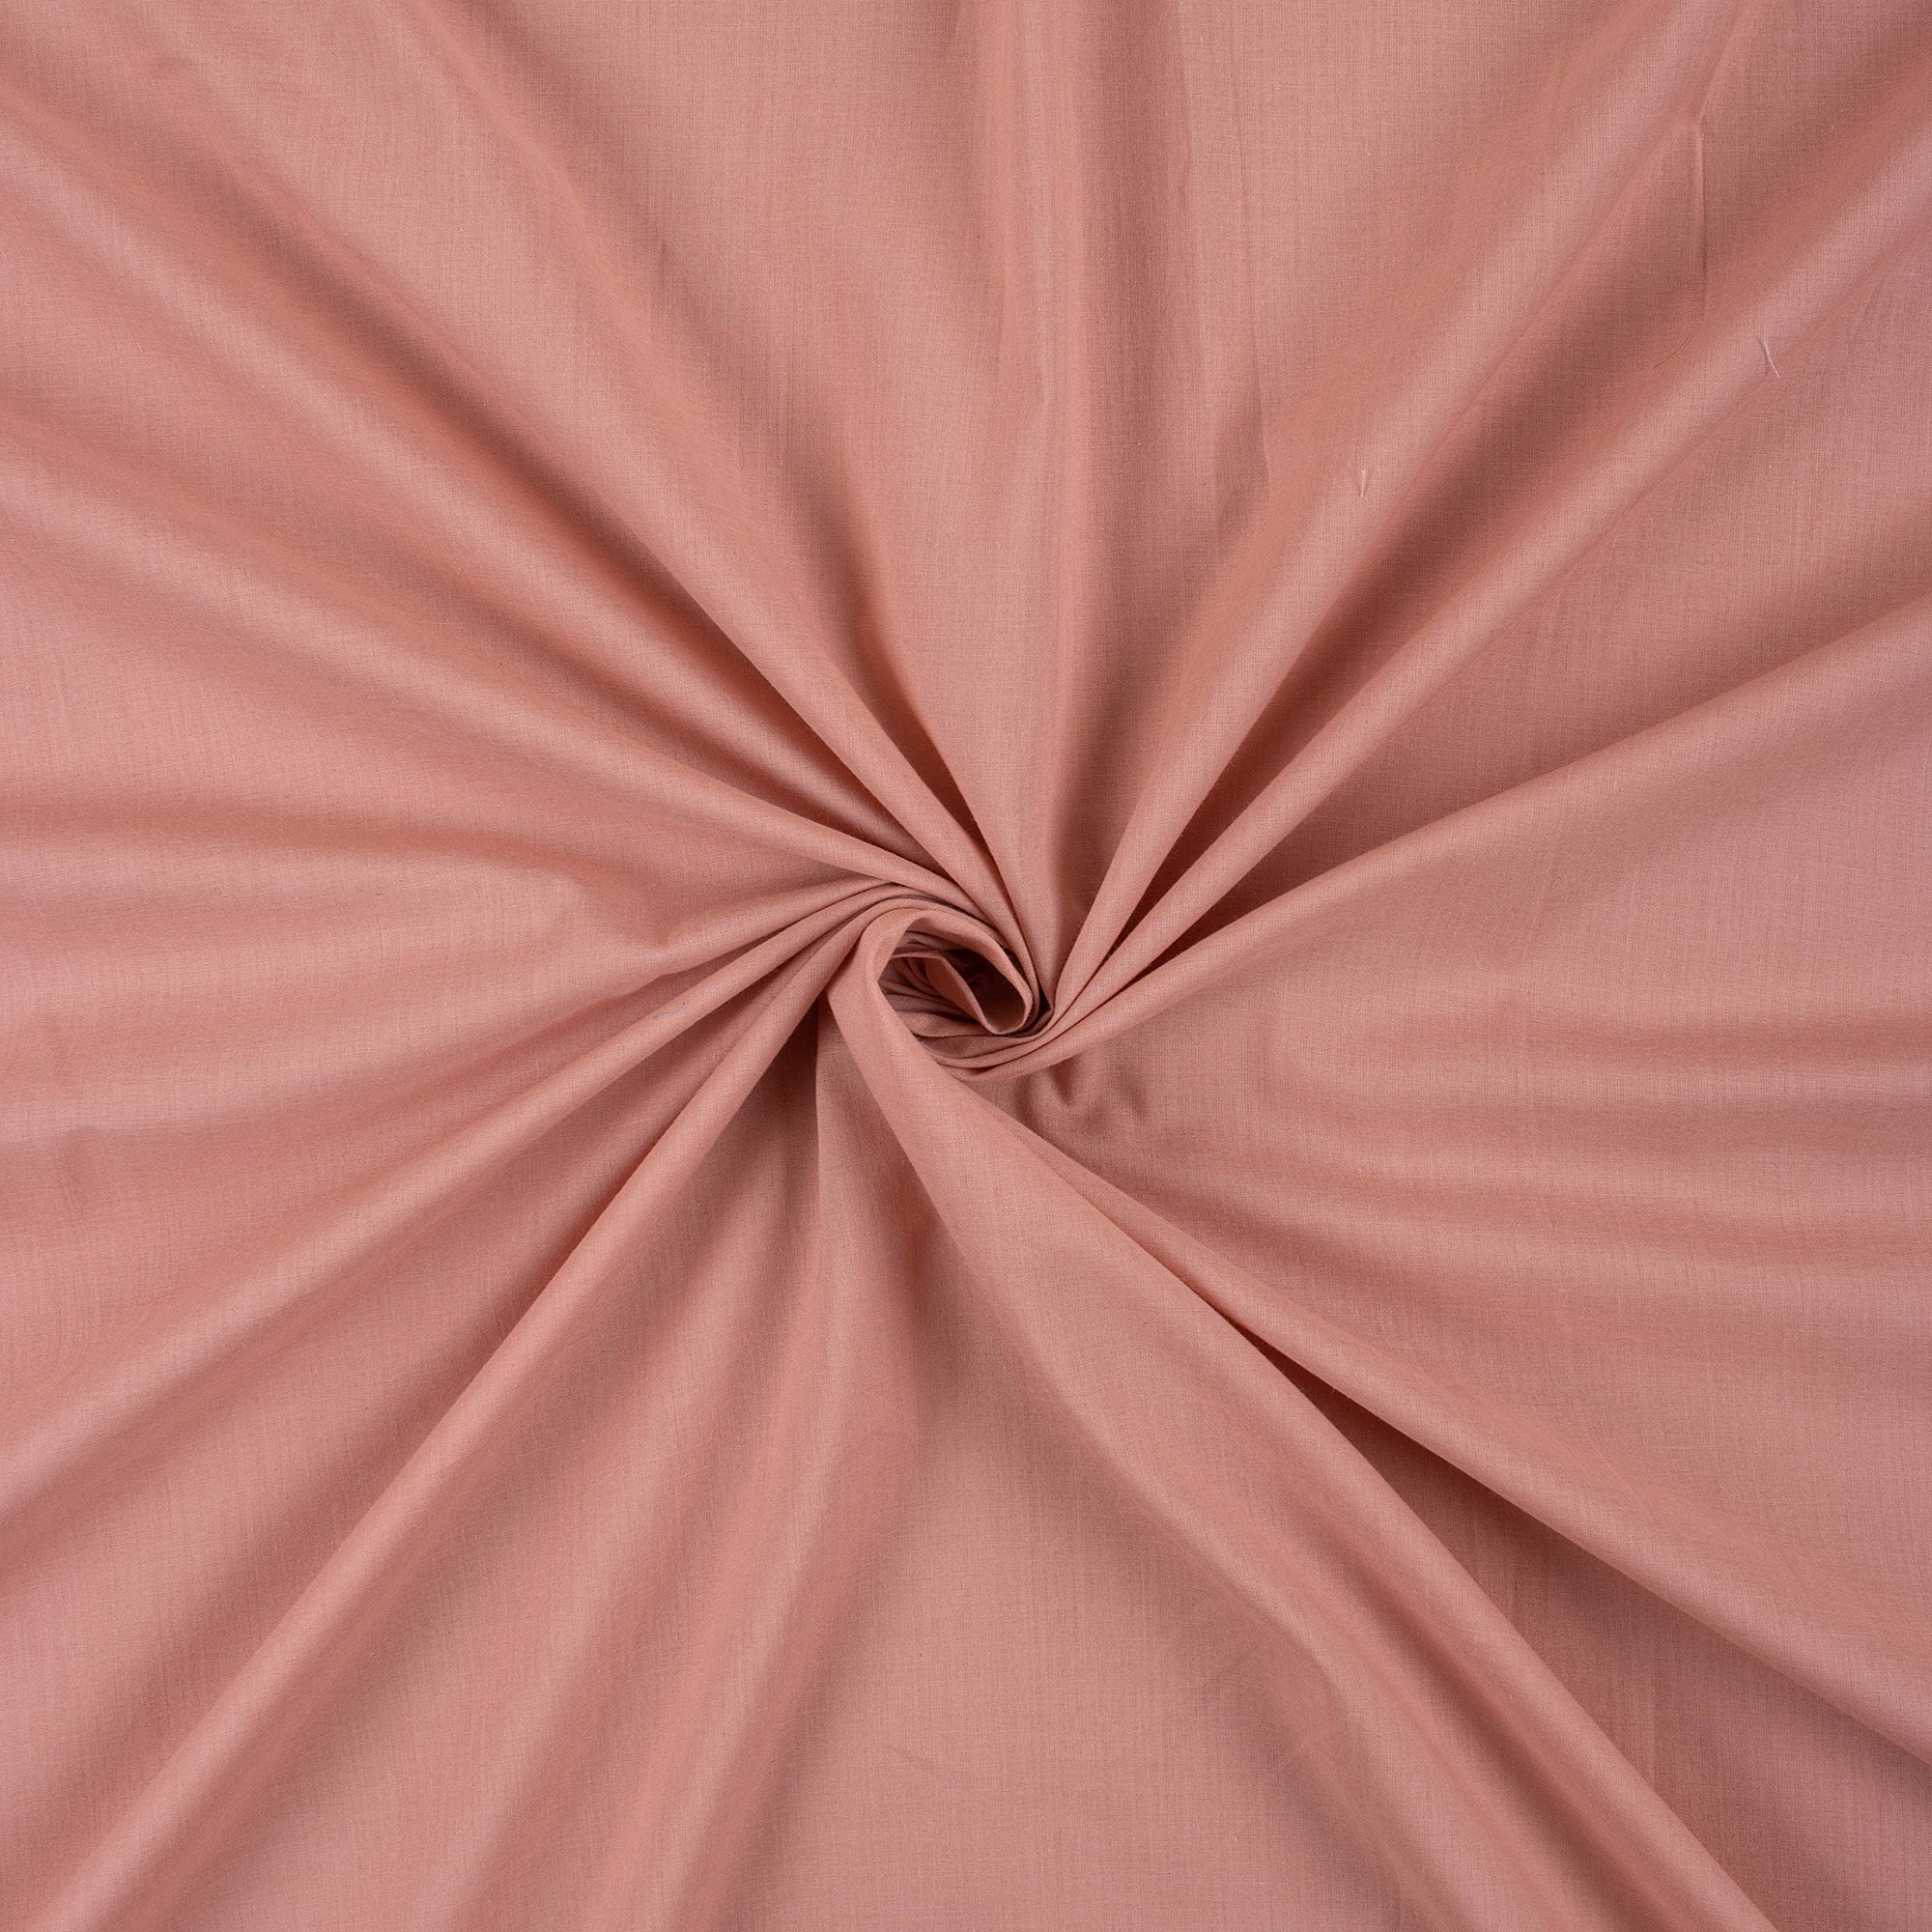 Solid Light Pink Soft Cotton Plain Material